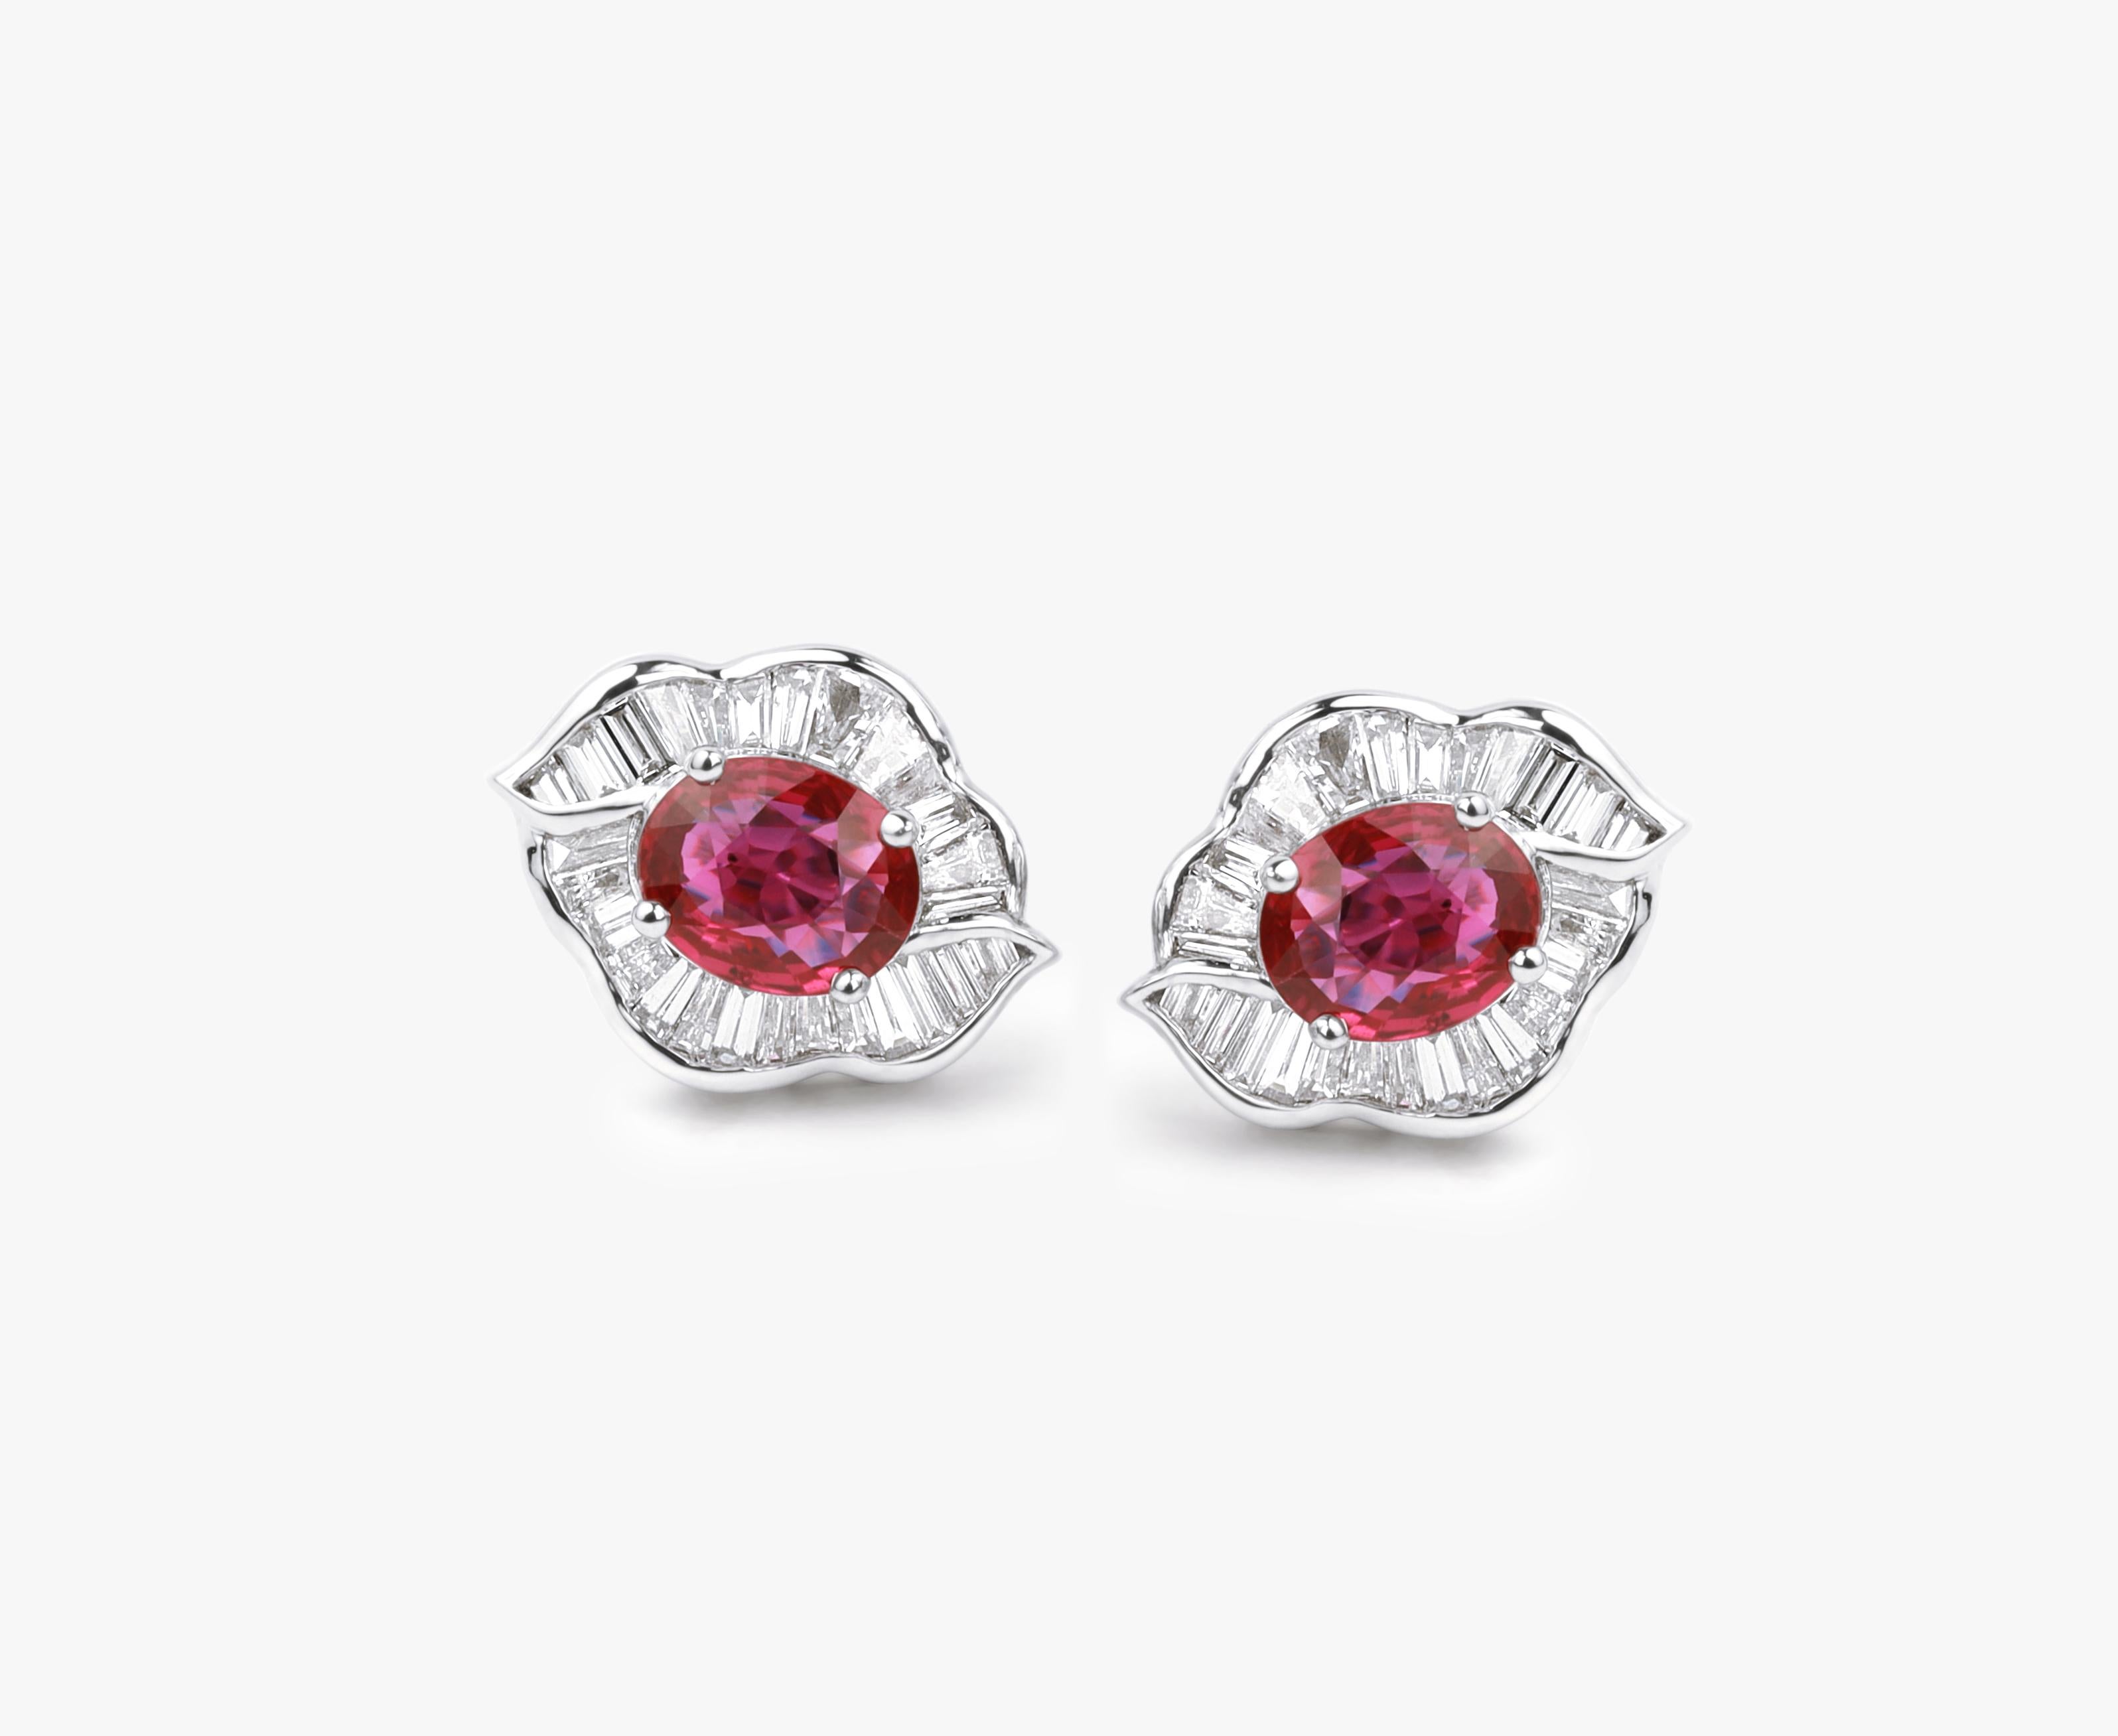 Exceptional oval natural ruby diamond stud earrings, halo diamond in 18k gold


Available in 18k white gold.

Same design can be made also with other custom gemstones per request.

Product details:

- Solid gold (approx. 4 grams)

- approx. 0.70